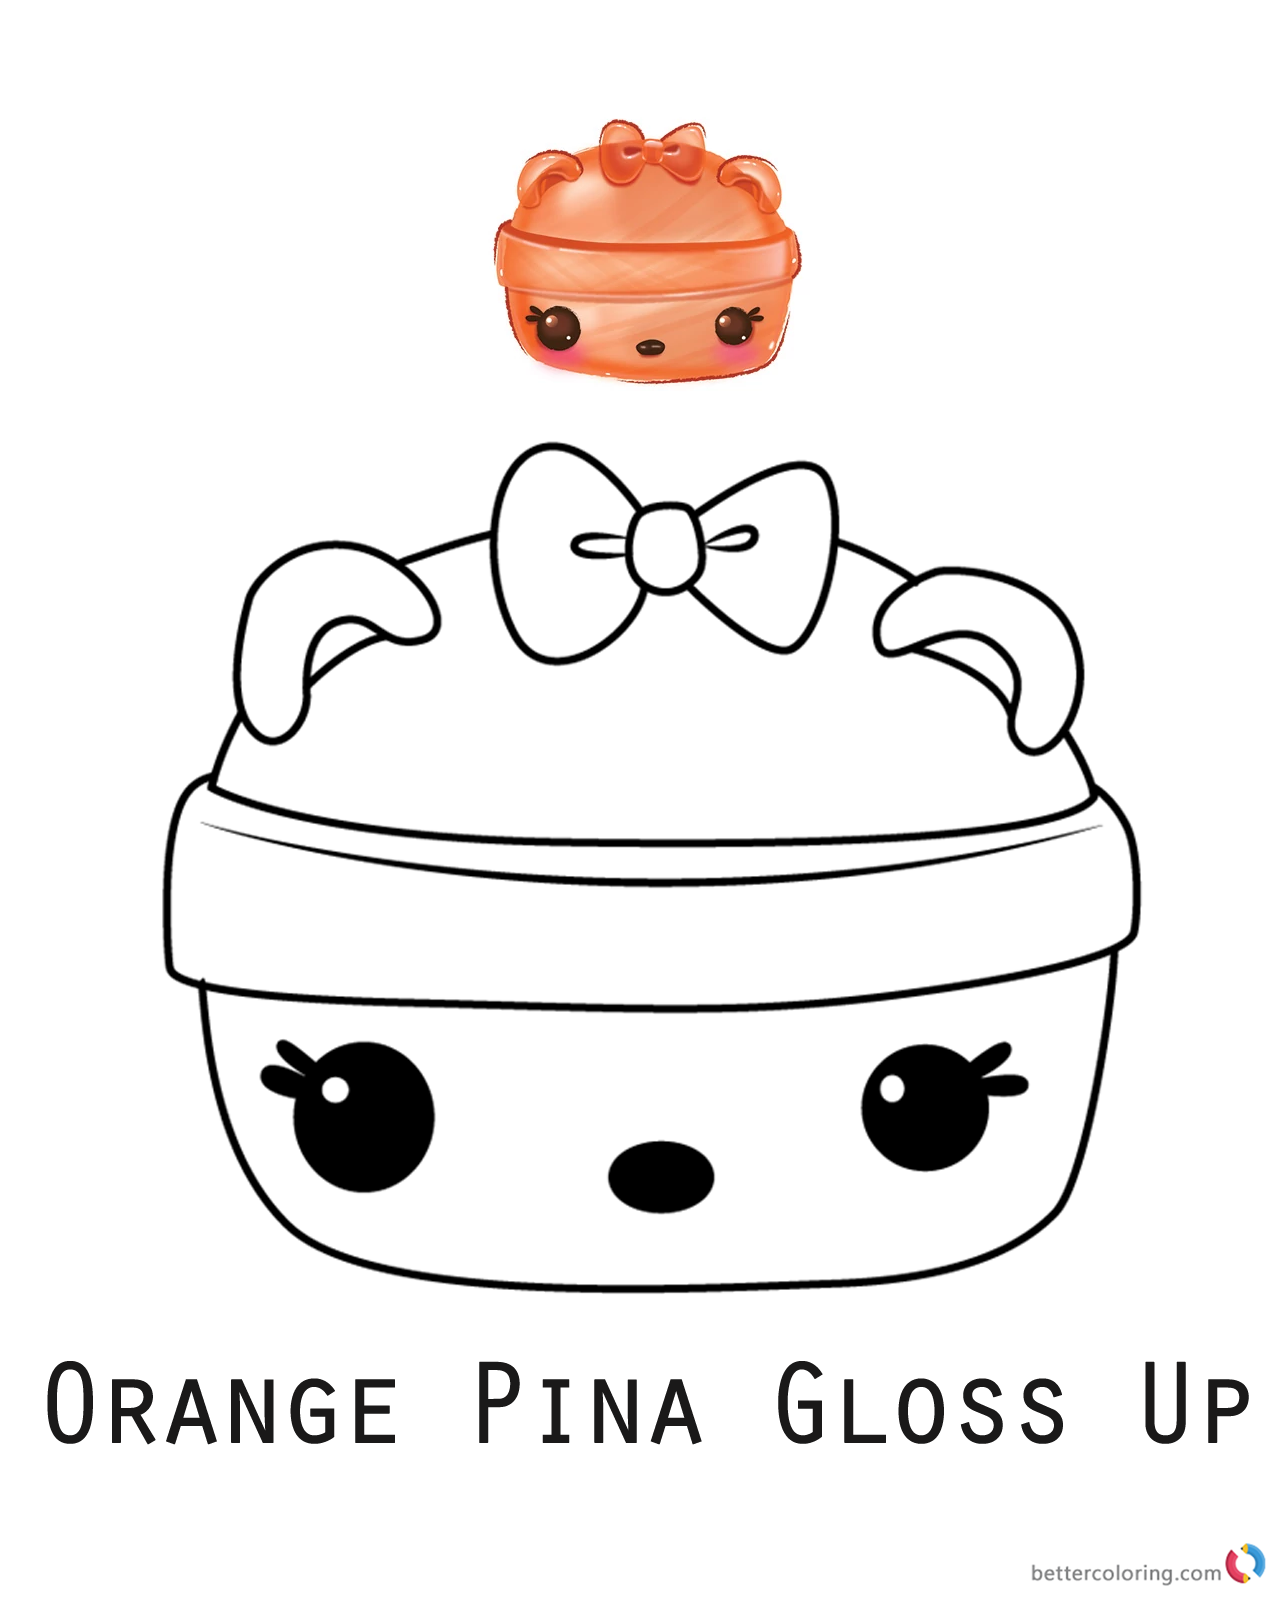 Download Num Noms Coloring Pages Orange Pina Gloss-Up - Free Printable Coloring Pages